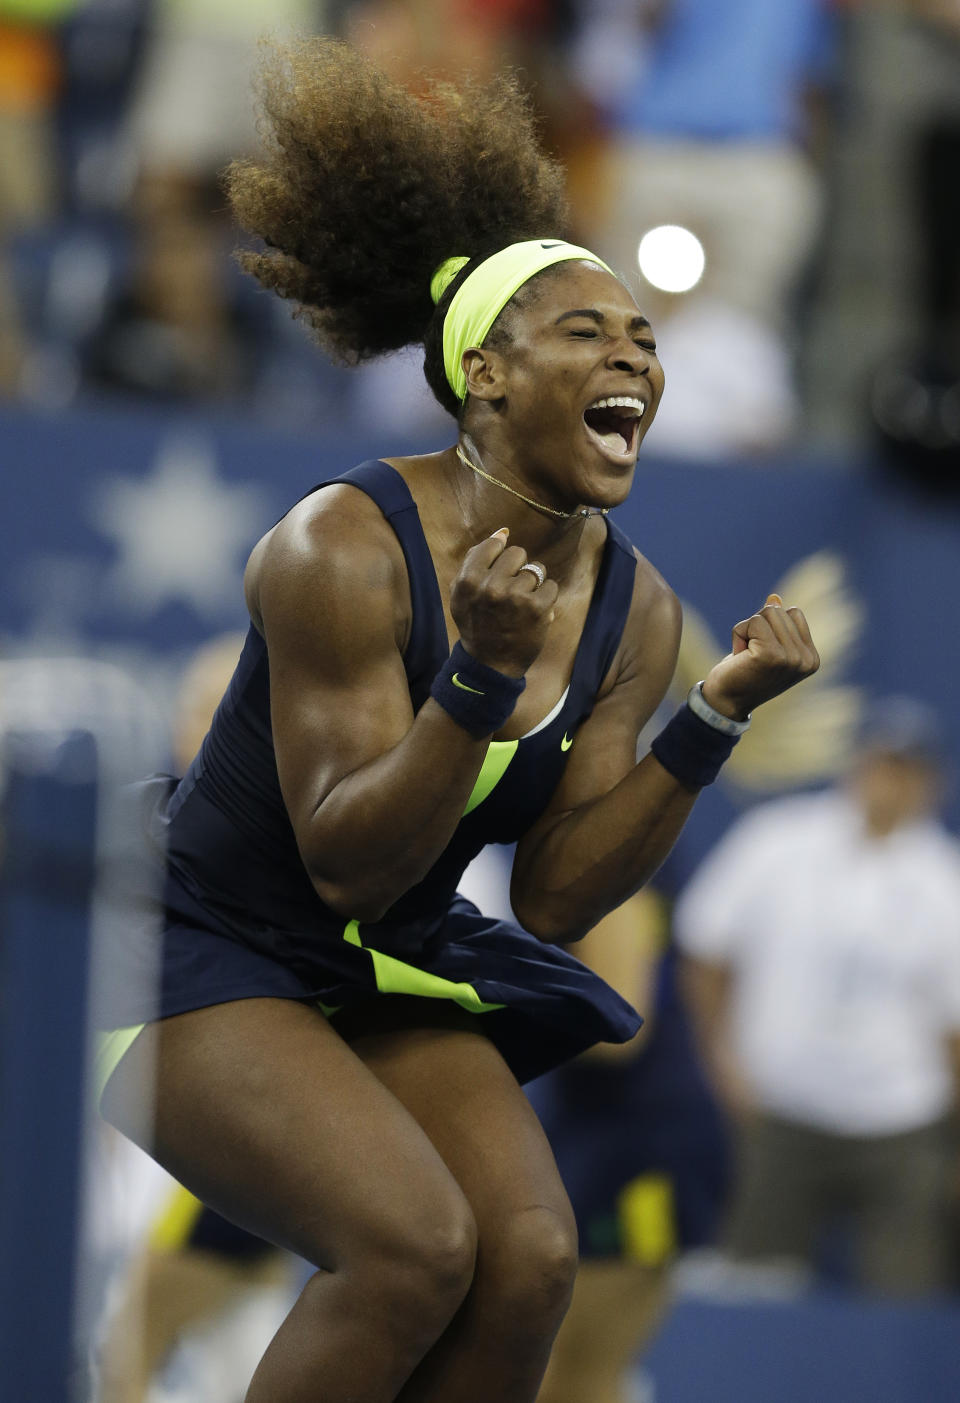 File-This Sept. 9, 2012, file photo shows Serena Williams reacting after beating Victoria Azarenka, of Belarus, in the championship match at the 2012 US Open tennis tournament in New York. Williams has been voted the AP Female Athlete of the Decade for 2010 to 2019. Williams won 12 of her professional-era record 23 Grand Slam singles titles over the past 10 years. No other woman won more than three in that span. She also tied a record for most consecutive weeks ranked No. 1 and collected a tour-leading 37 titles in all during the decade. Gymnast Simone Biles finished second in the vote by AP member sports editors and AP beat writers. Swimmer Katie Ledecky was third, followed by ski racers Lindsey Vonn and Mikaela Shiffrin. (AP Photo/Darron Cummings, File)